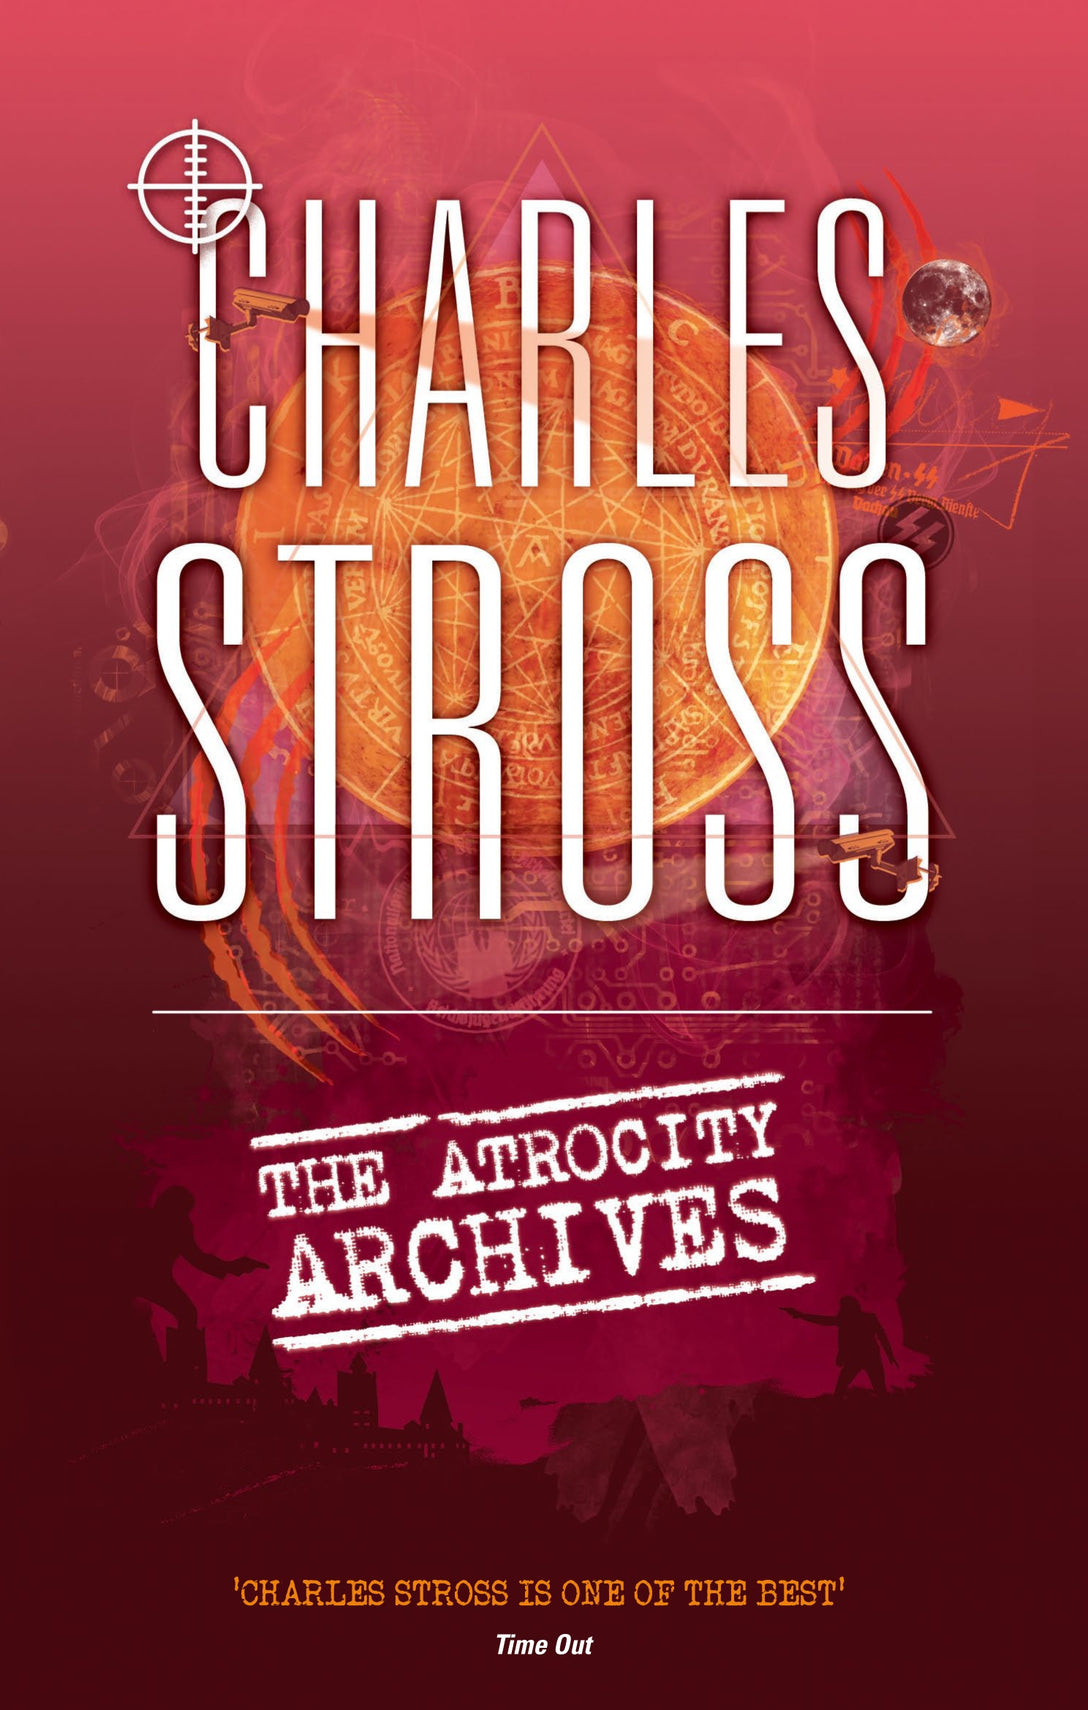 The Atrocity Archives by Charles Stross